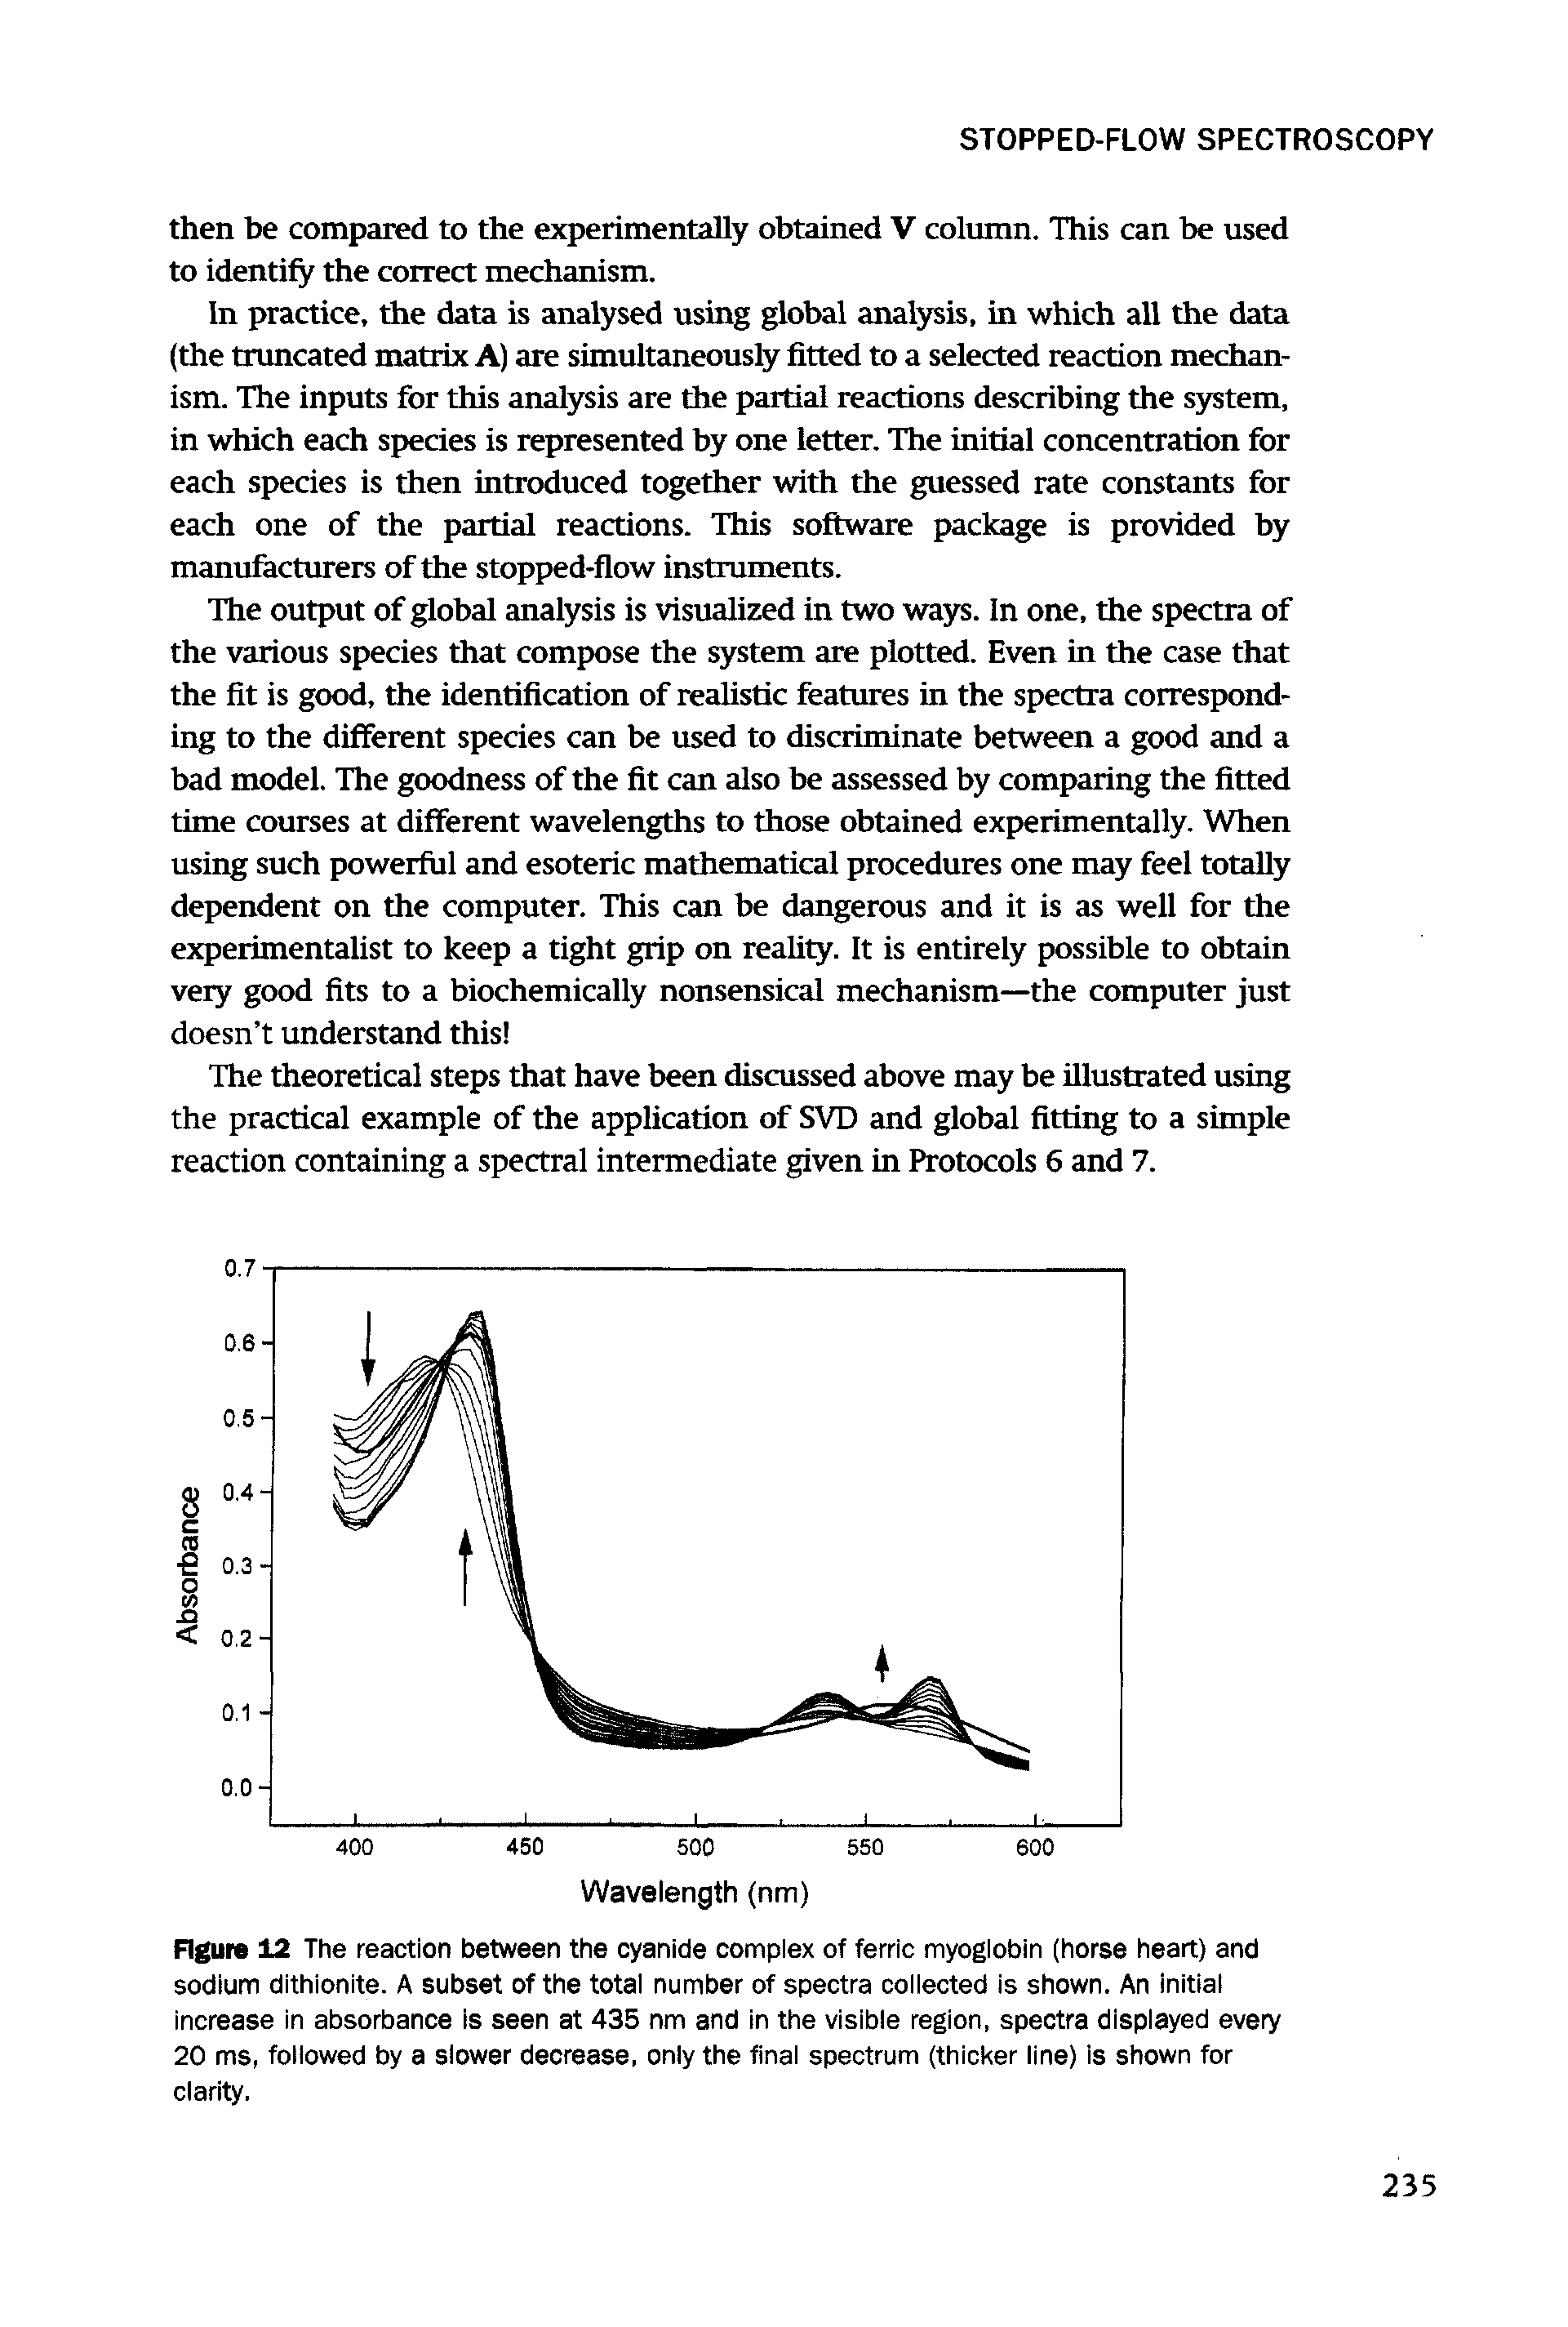 Figure 12 The reaction between the cyanide complex of ferric myoglobin (horse heart) and sodium dithionite. A subset of the total number of spectra collected is shown. An initial increase in absorbance is seen at 435 nm and in the visible region, spectra displayed every 20 ms, followed by a slower decrease, only the final spectrum (thicker line) is shown for clarity.